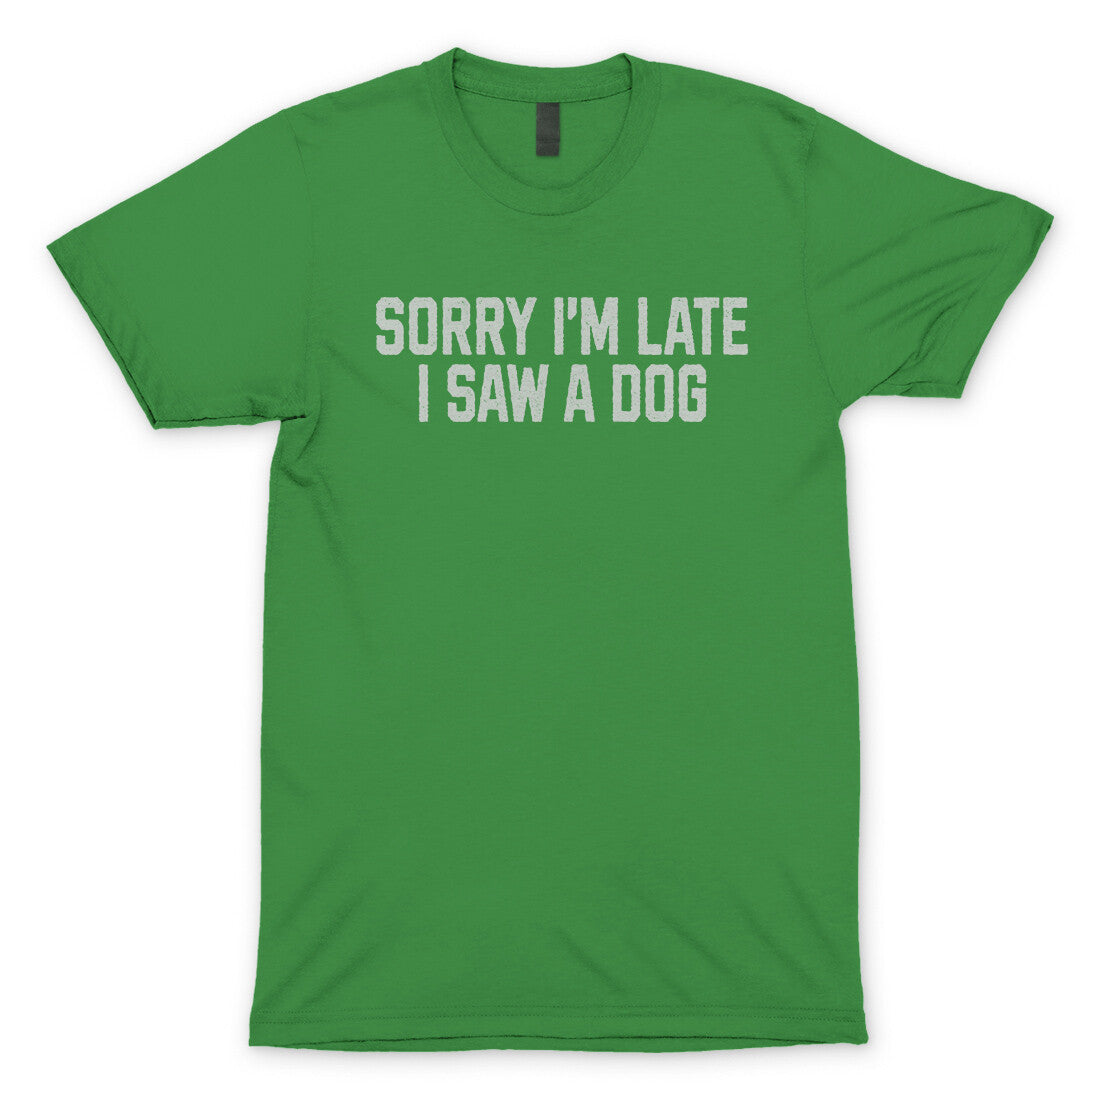 Sorry I'm Late I Saw a Dog in Irish Green Color